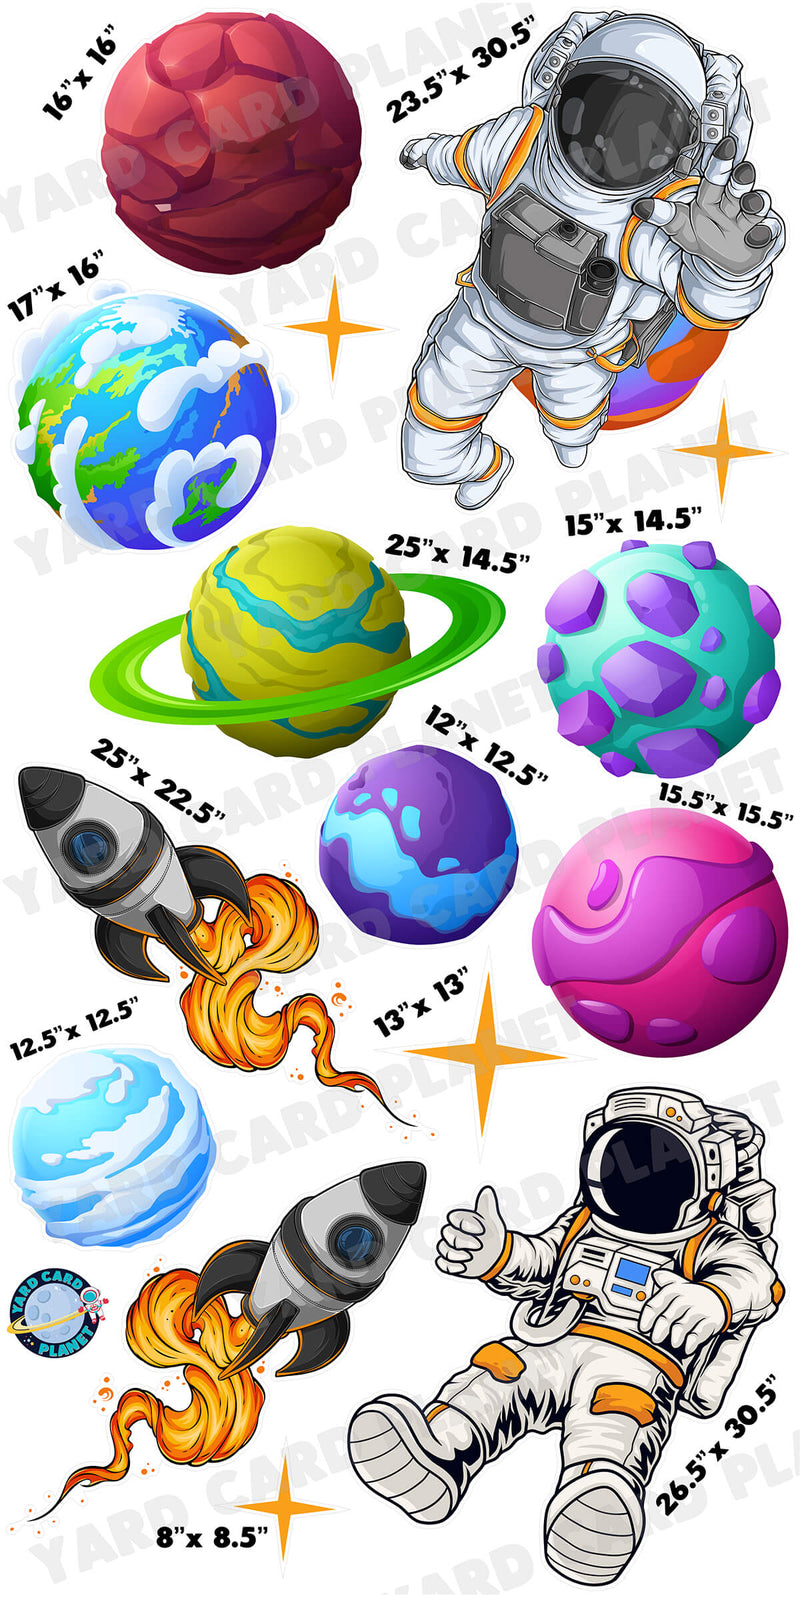 Astronauts, Planets and Rockets Yard Card Flair Set